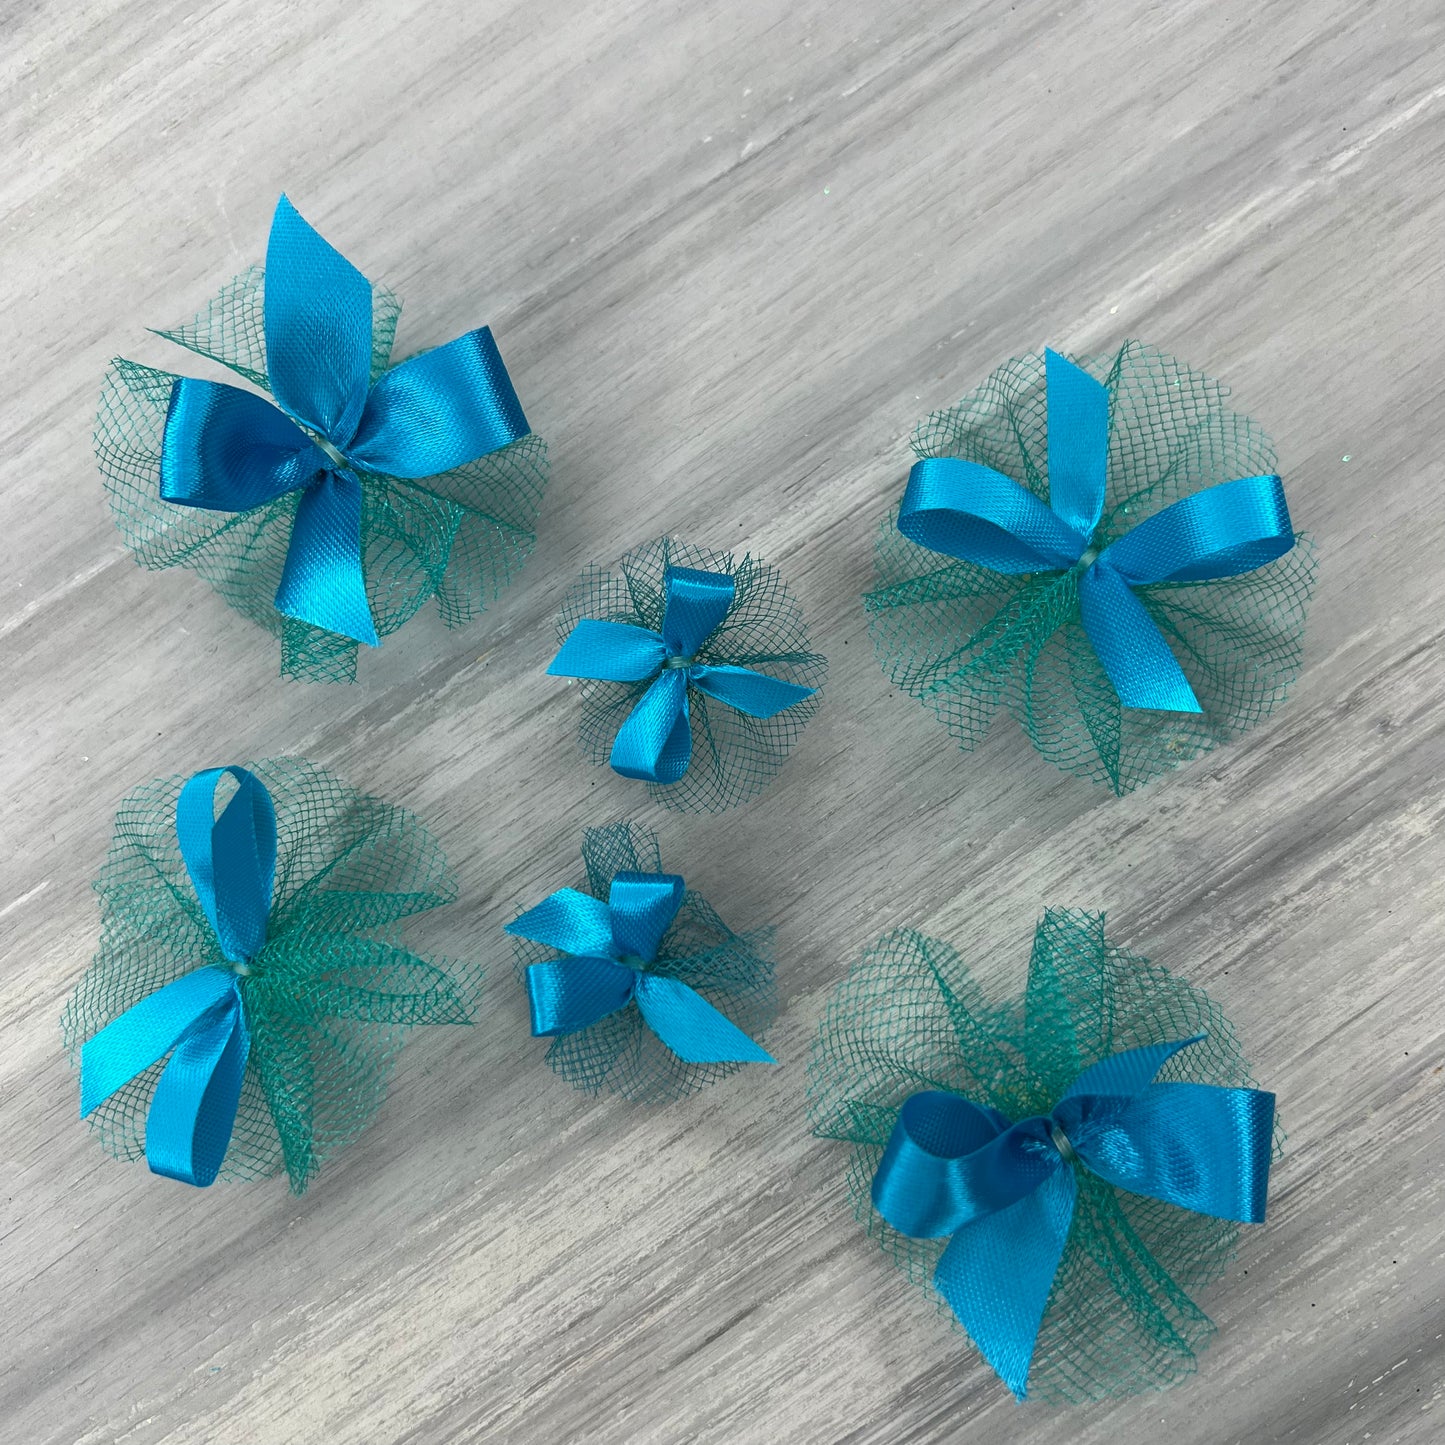 Combination Of Teal Bows - Includes 7/16, 5/8 & Petite - 50 Bows